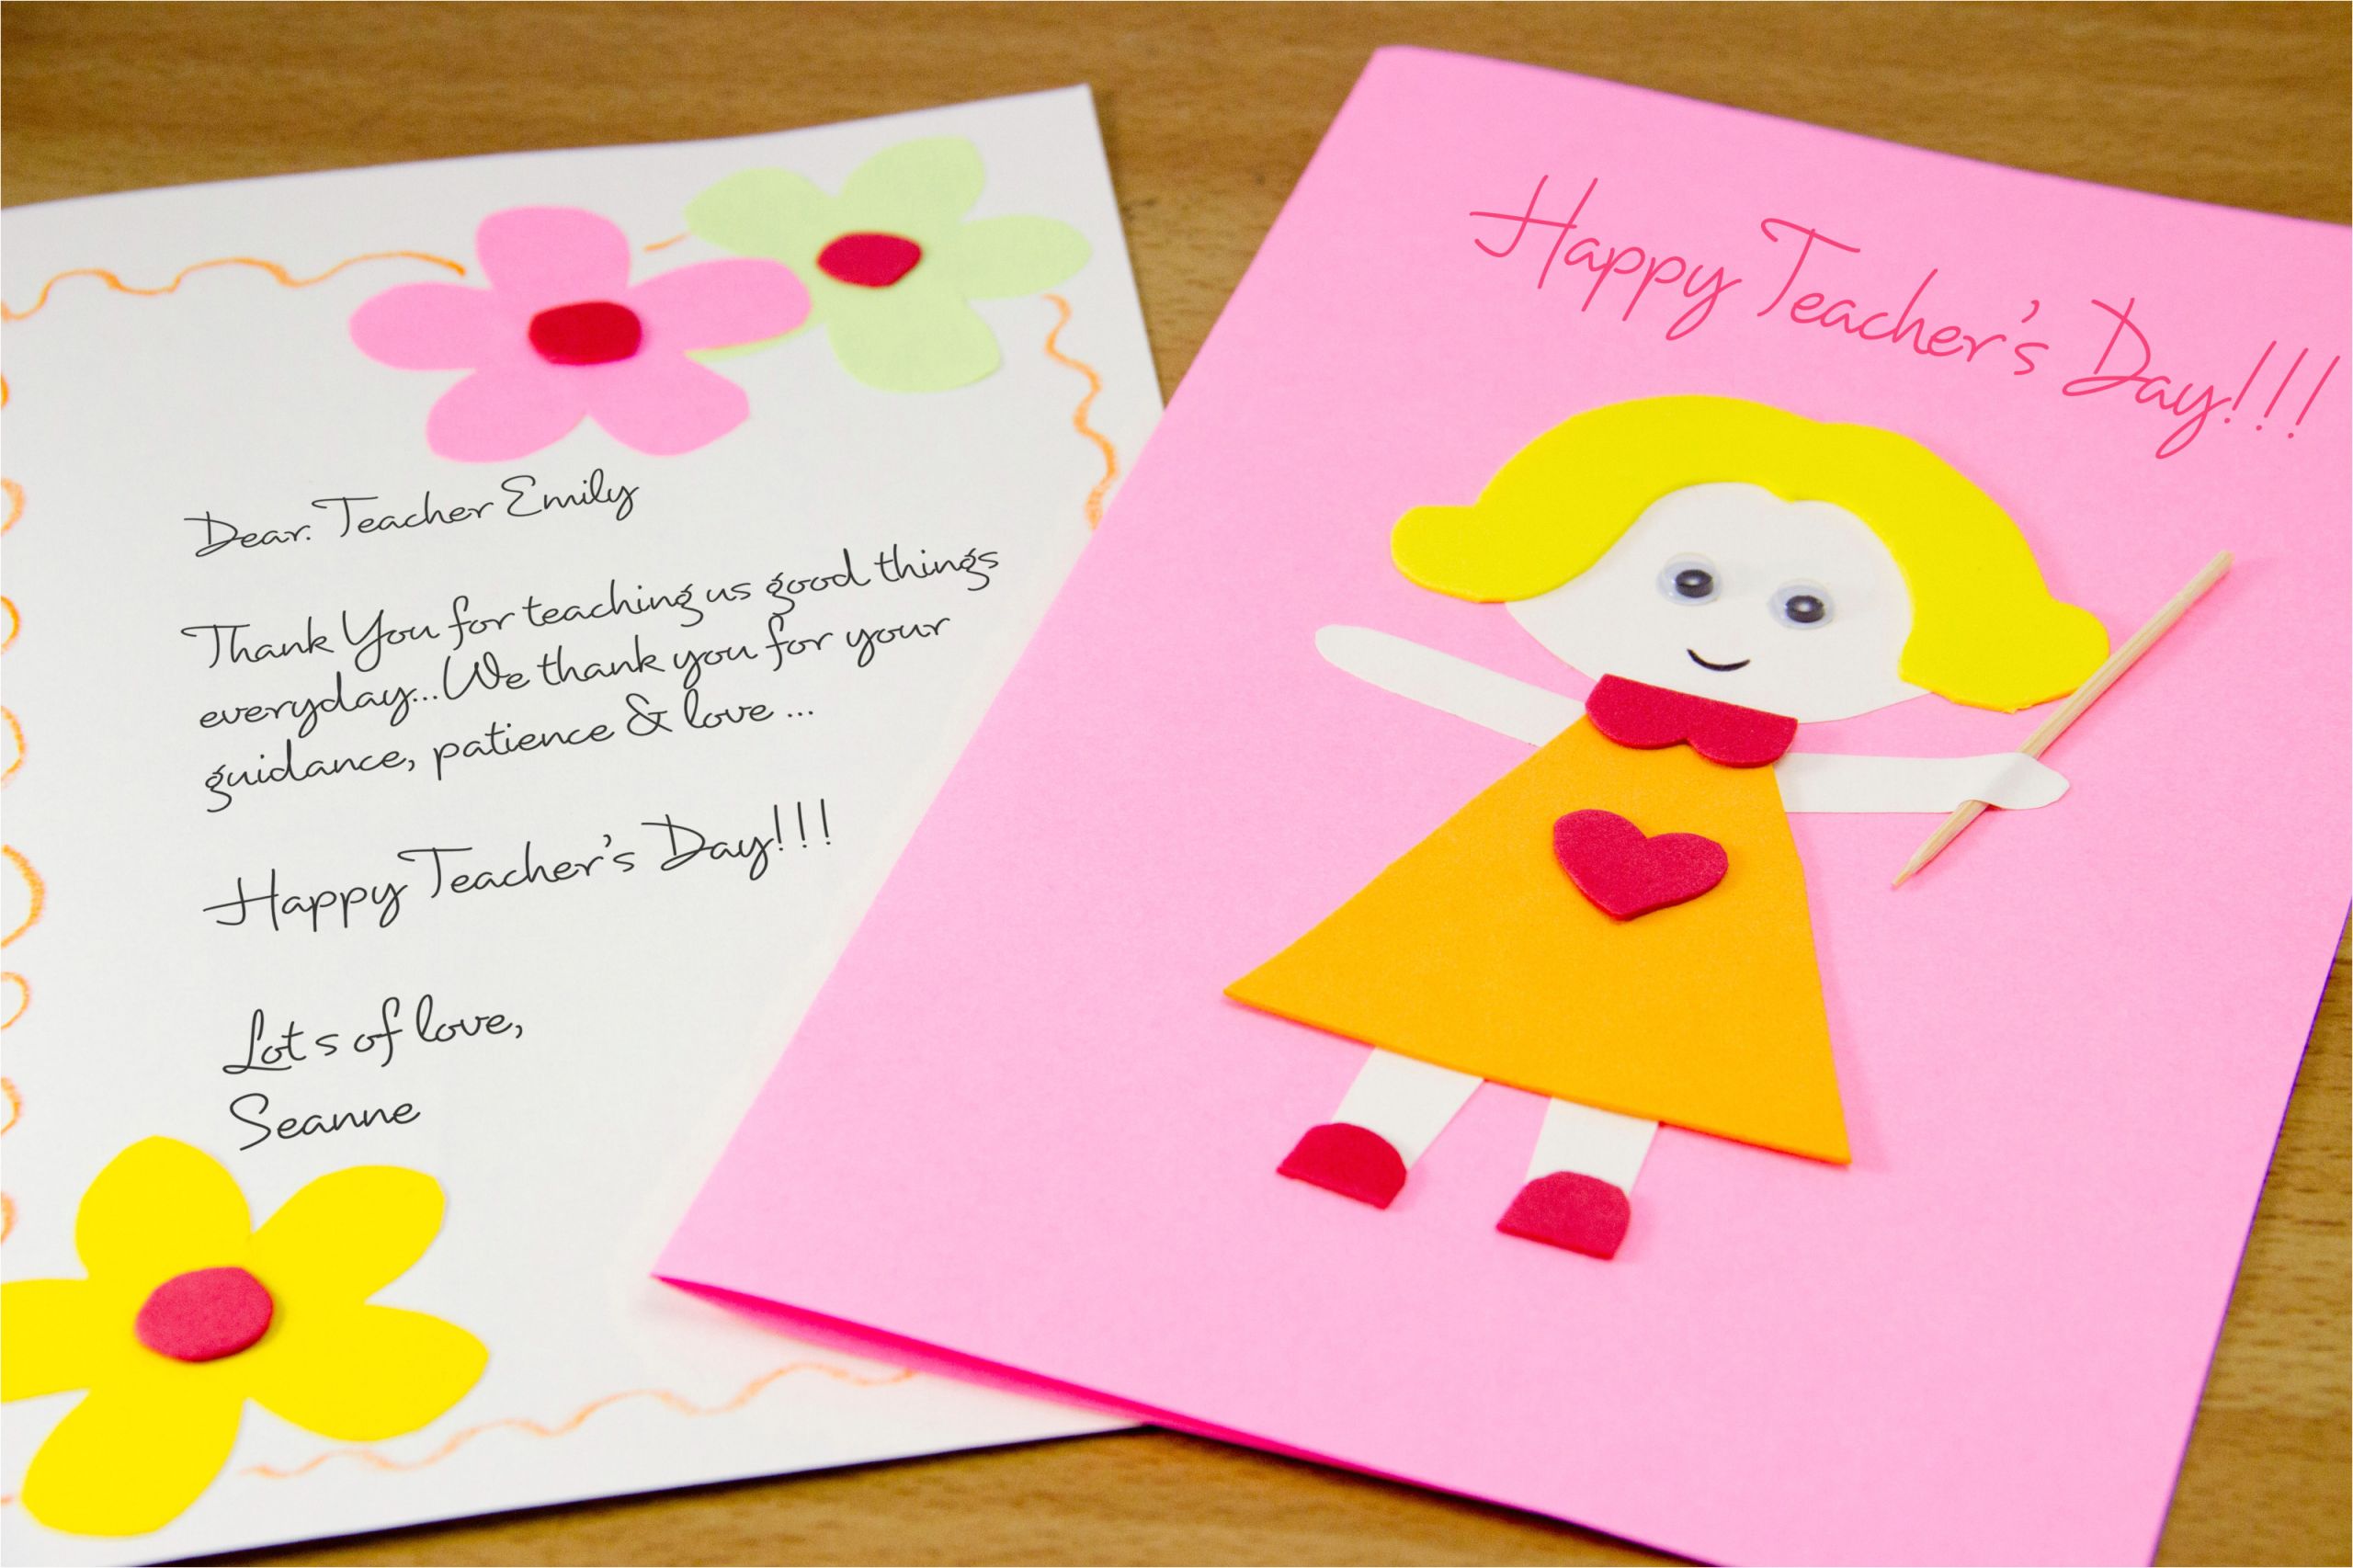 Teachers Day Card Made by 3 Year Old How to Make A Homemade Teacher S Day Card 7 Steps with